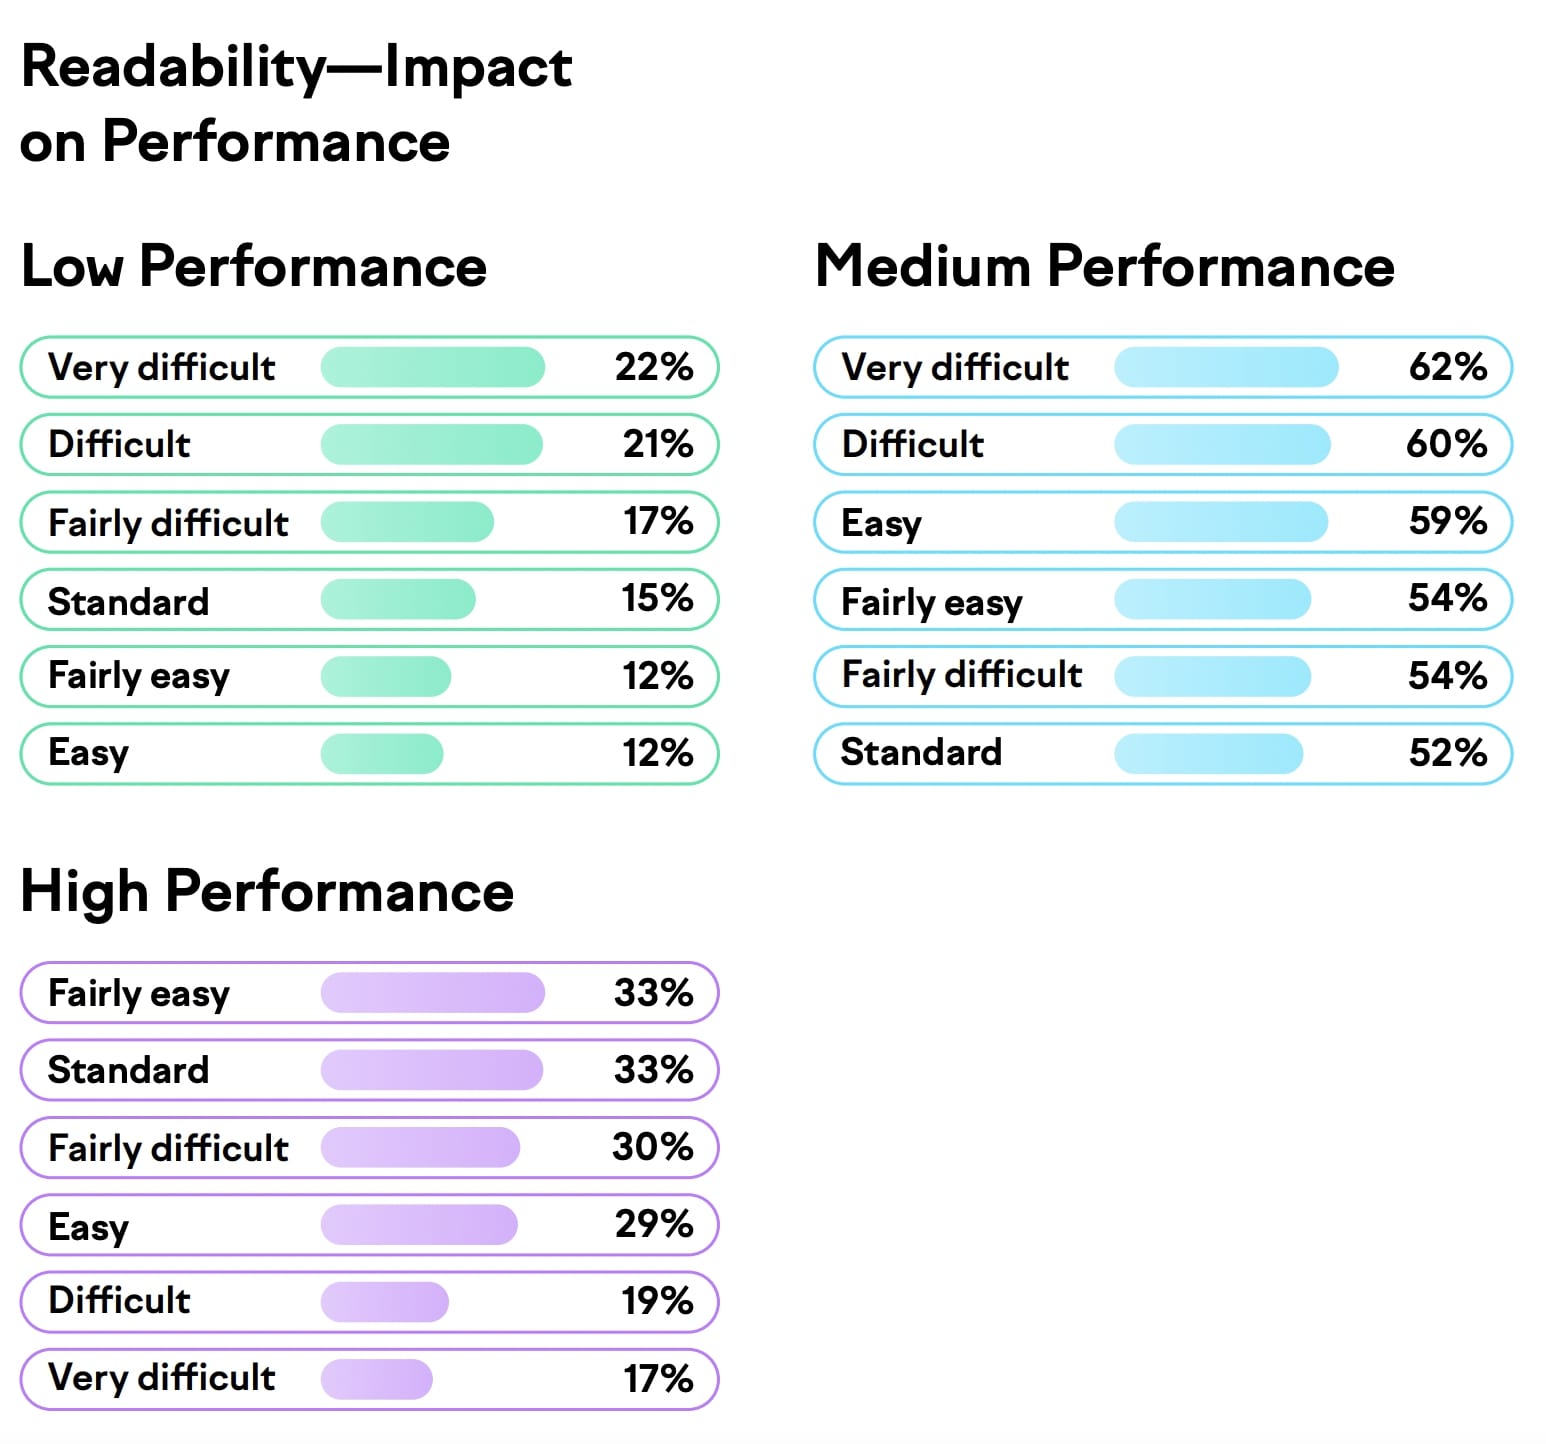 Results showing the impact of readability on performance